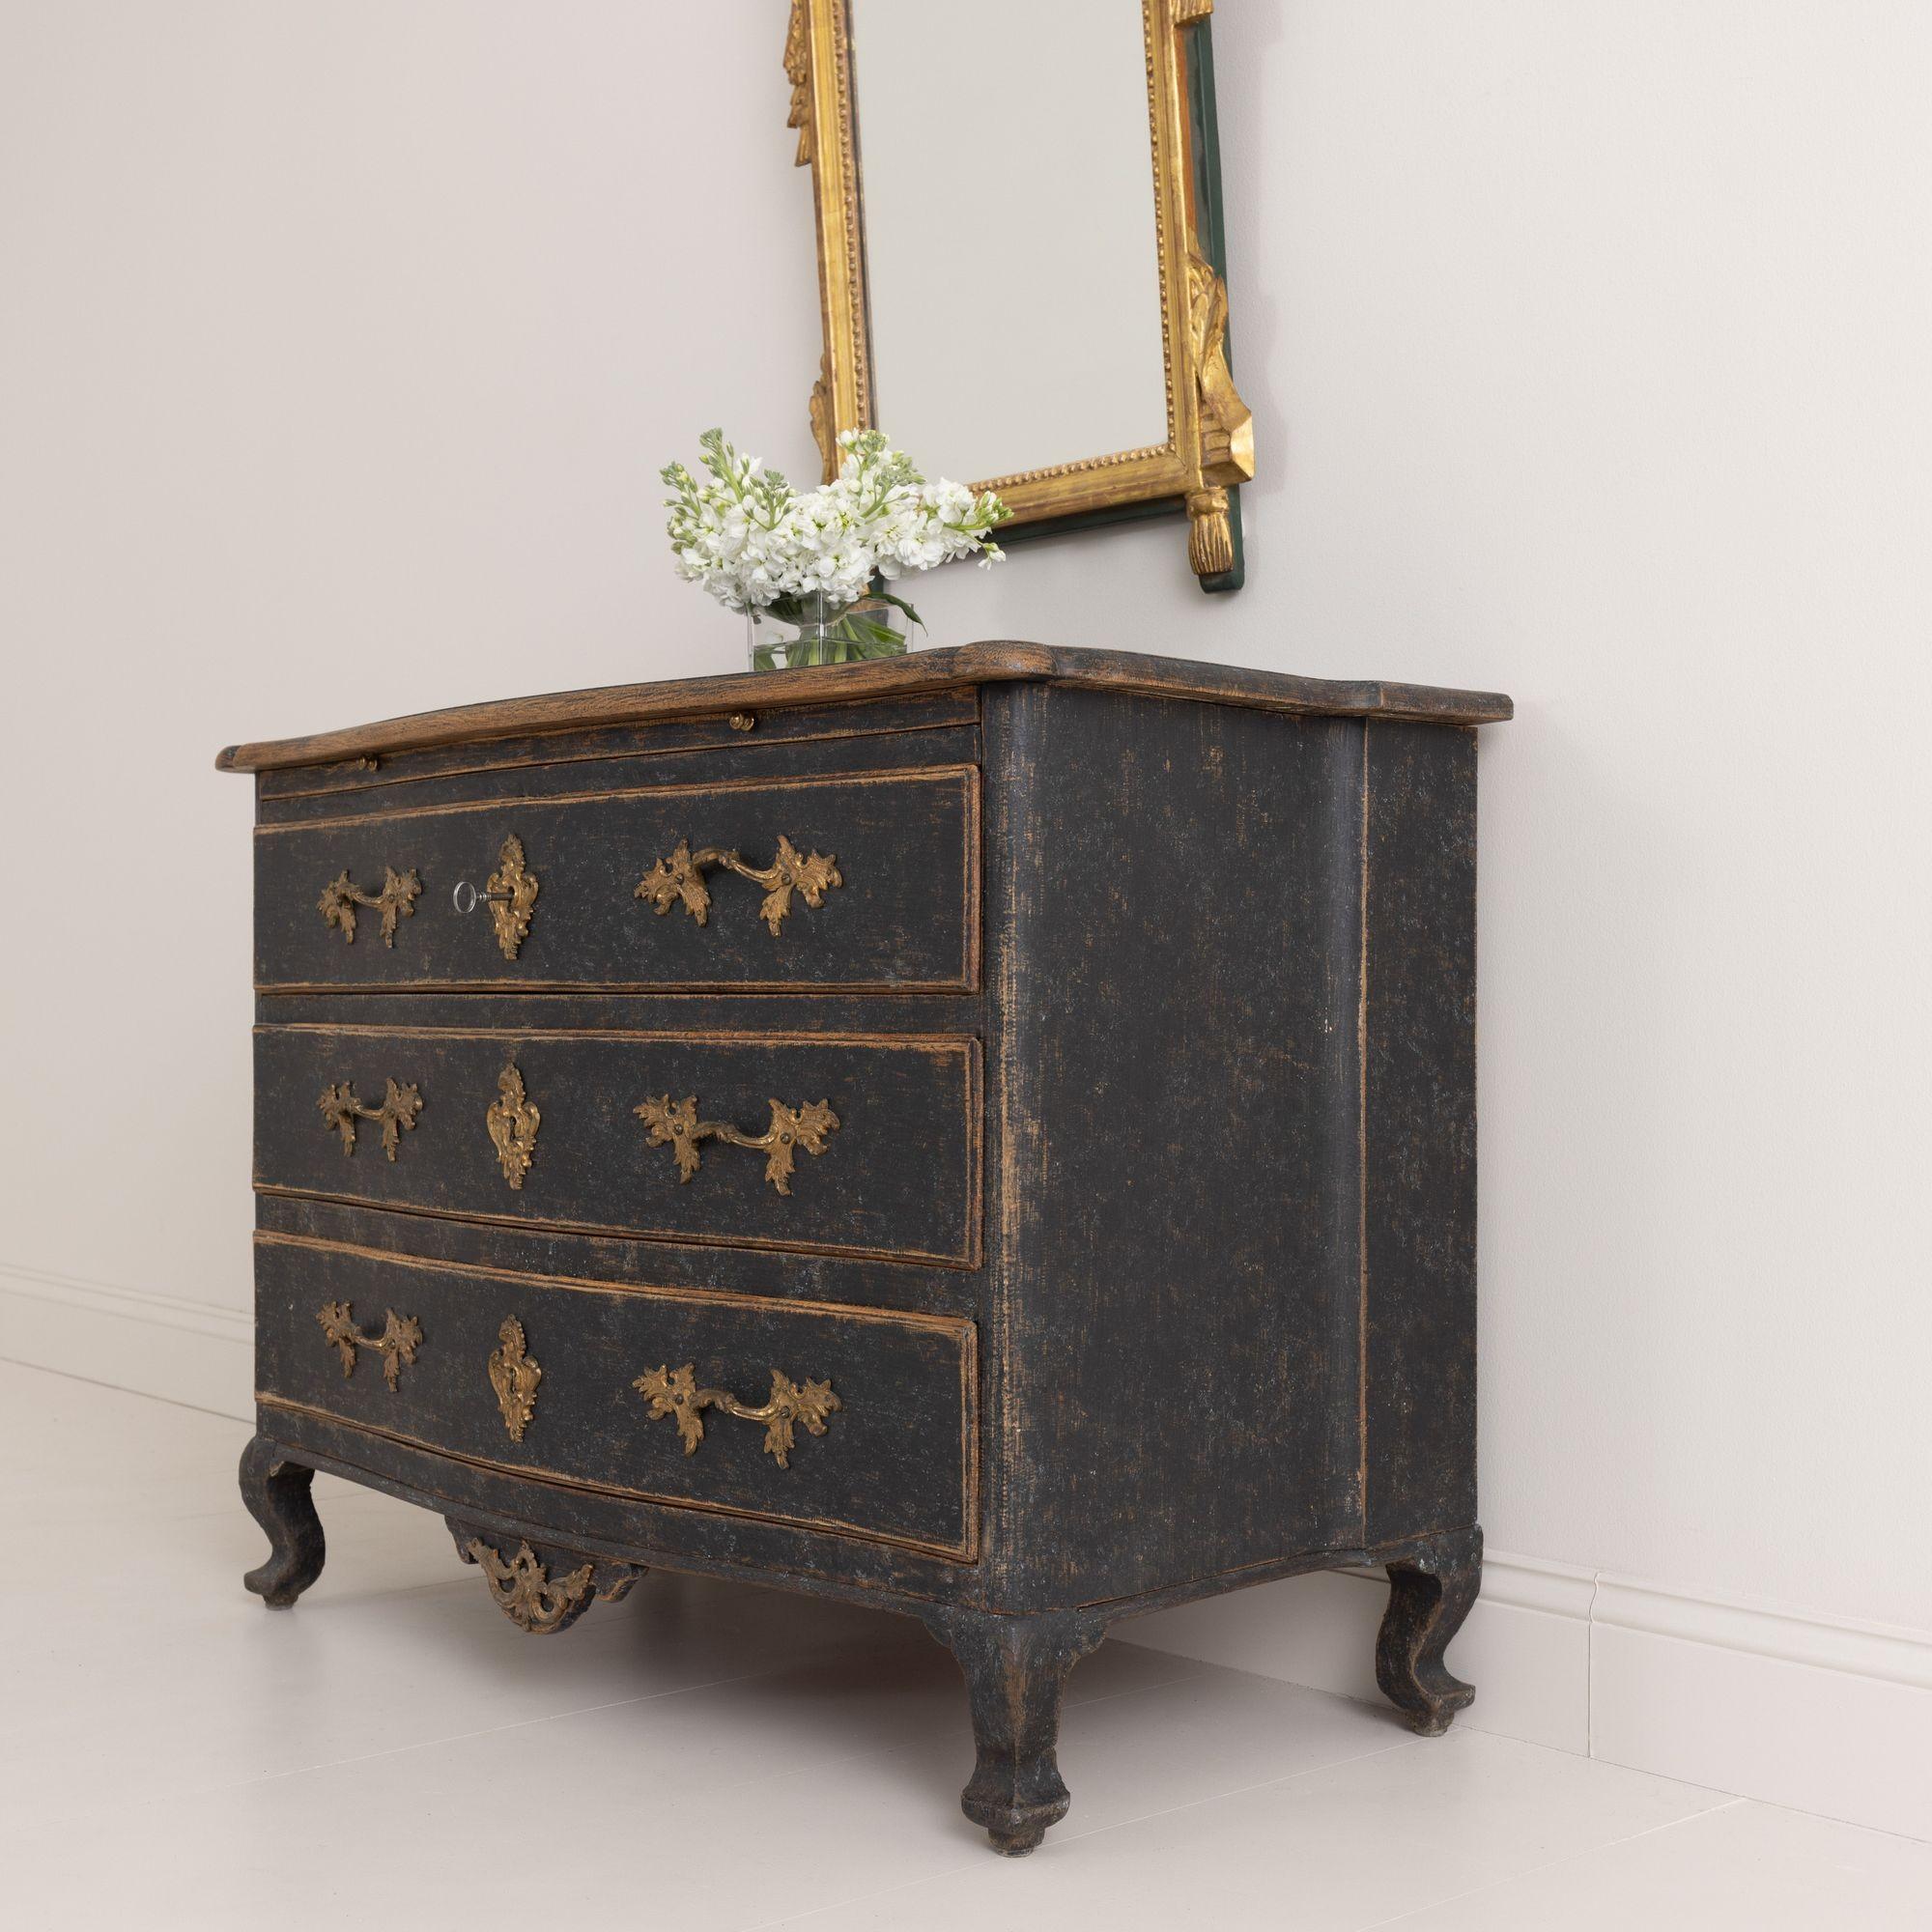 18th C. Swedish Rococo Period Black Painted Commode with Original Brass Hardware For Sale 1